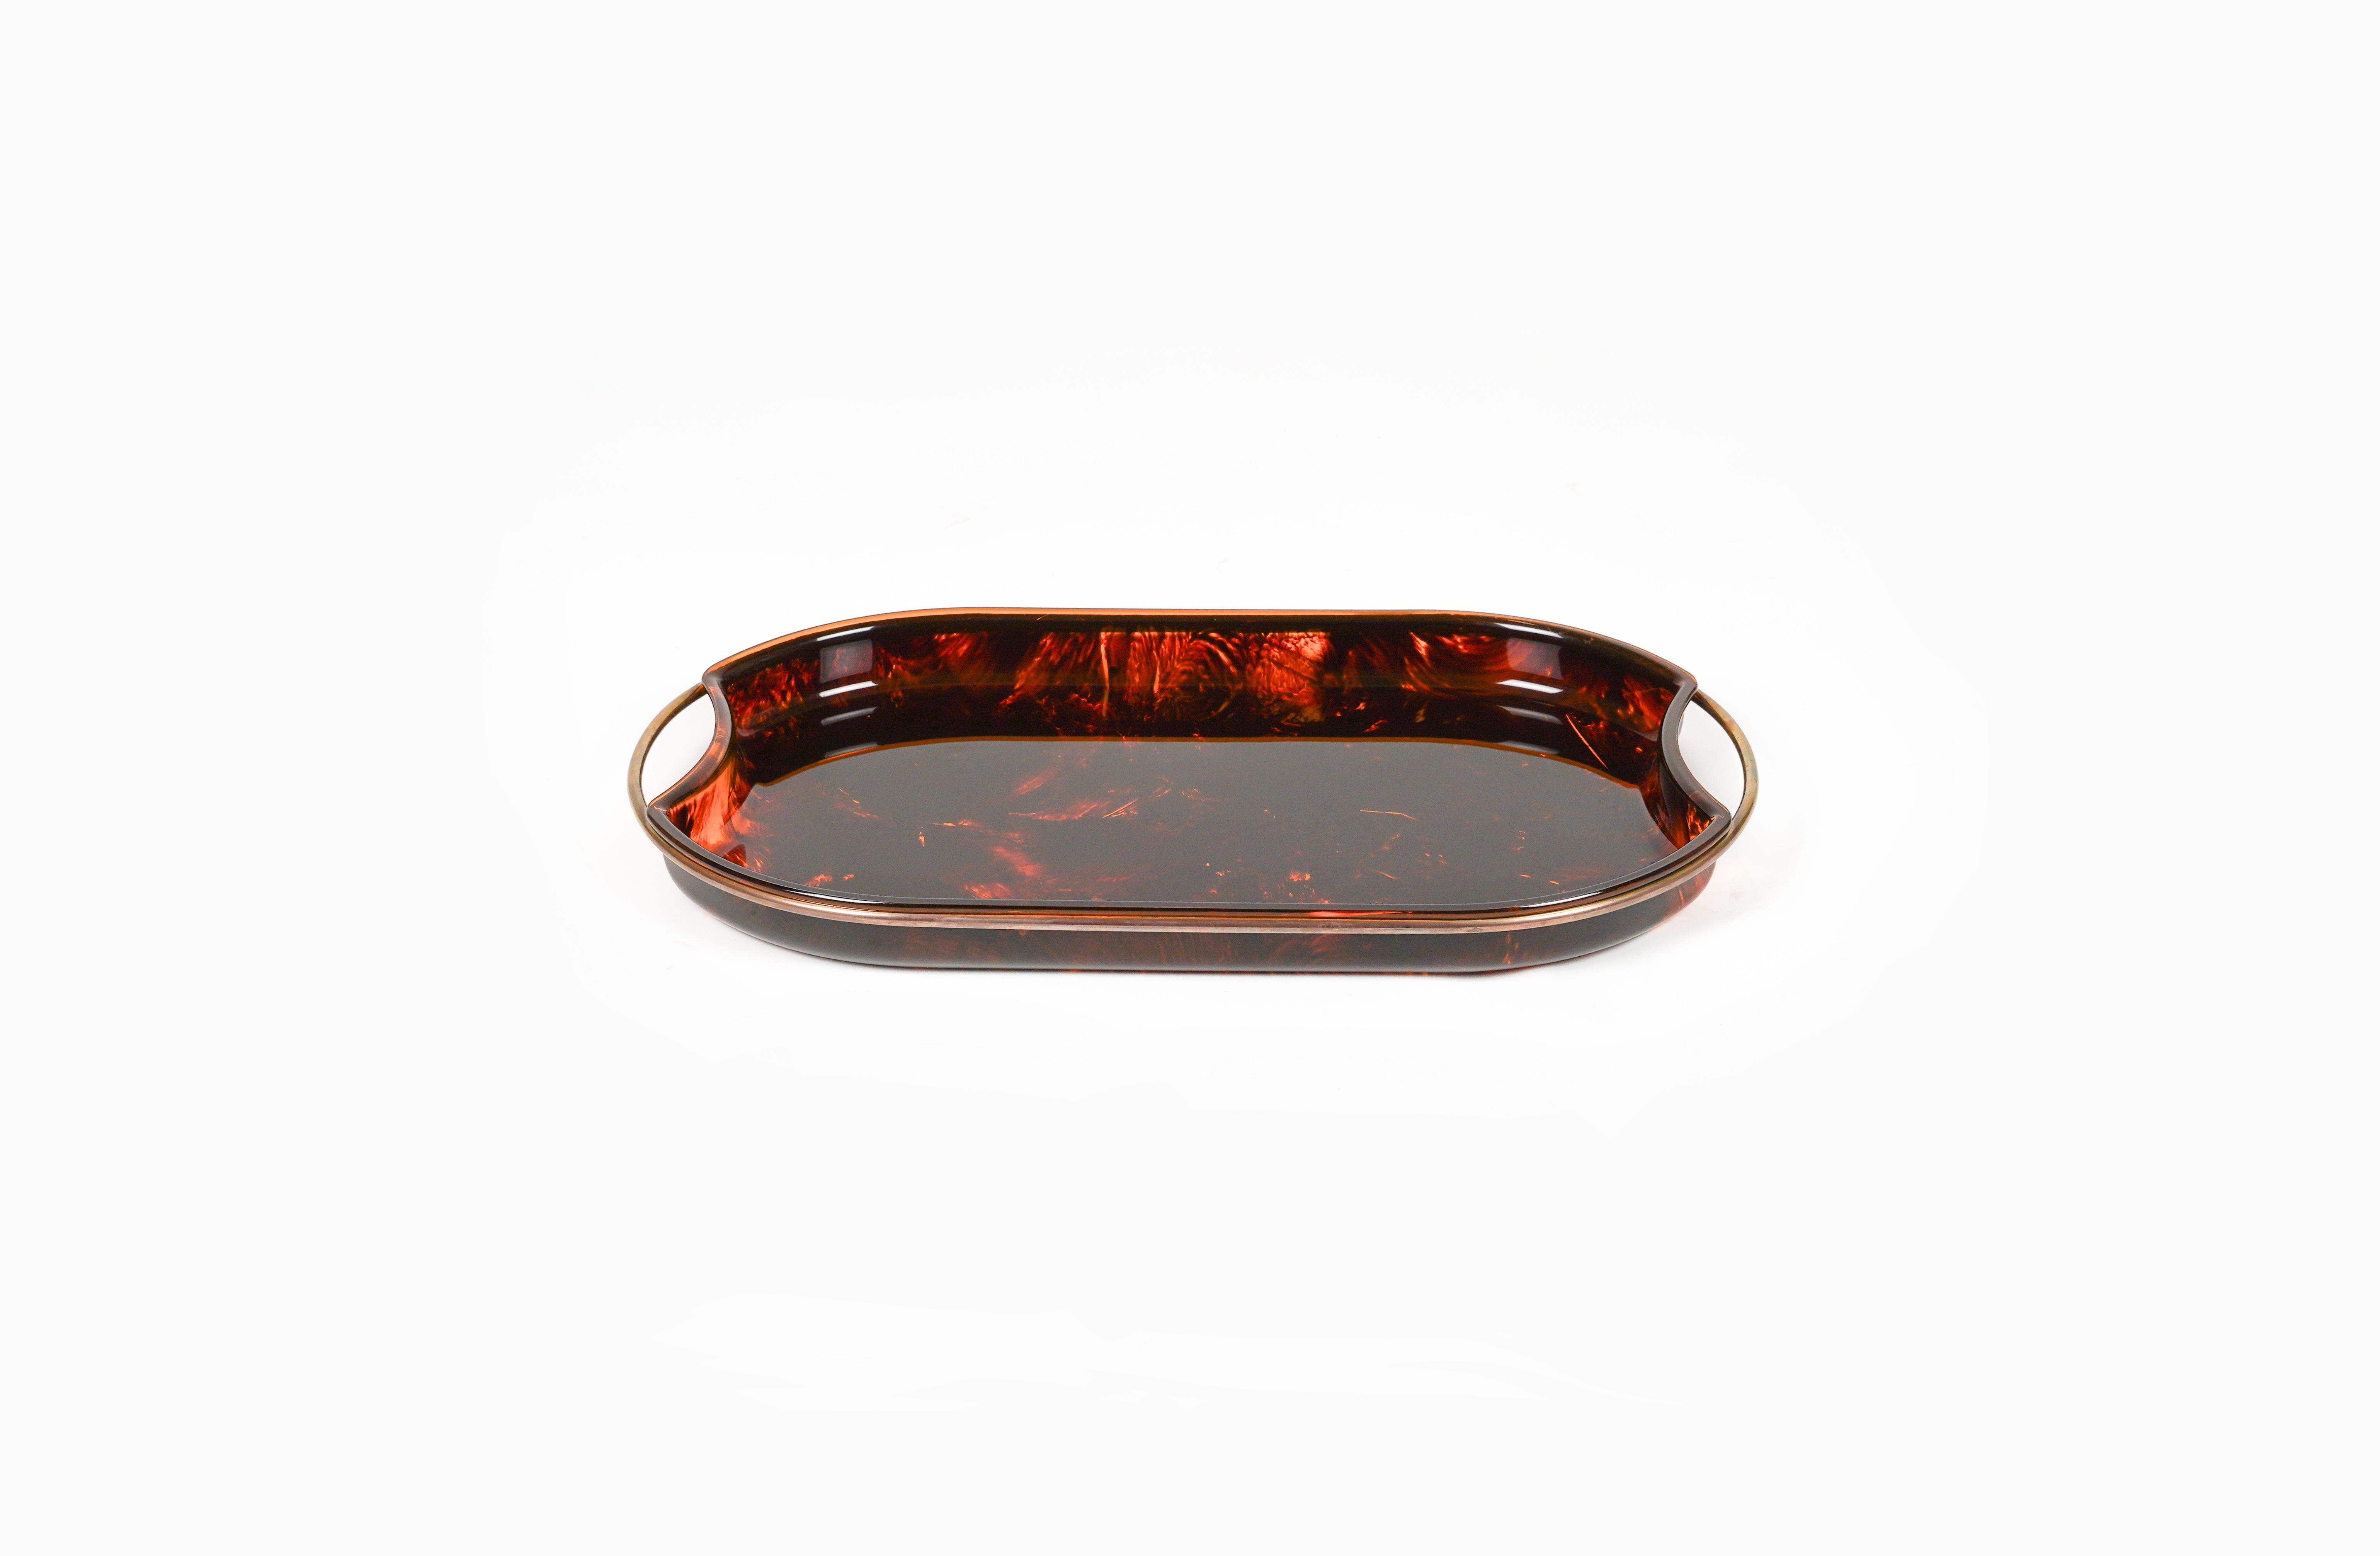 Italian Oval Serving Tray in Effect Tortoiseshell Lucite & Brass by Guzzini, Italy 1970s For Sale